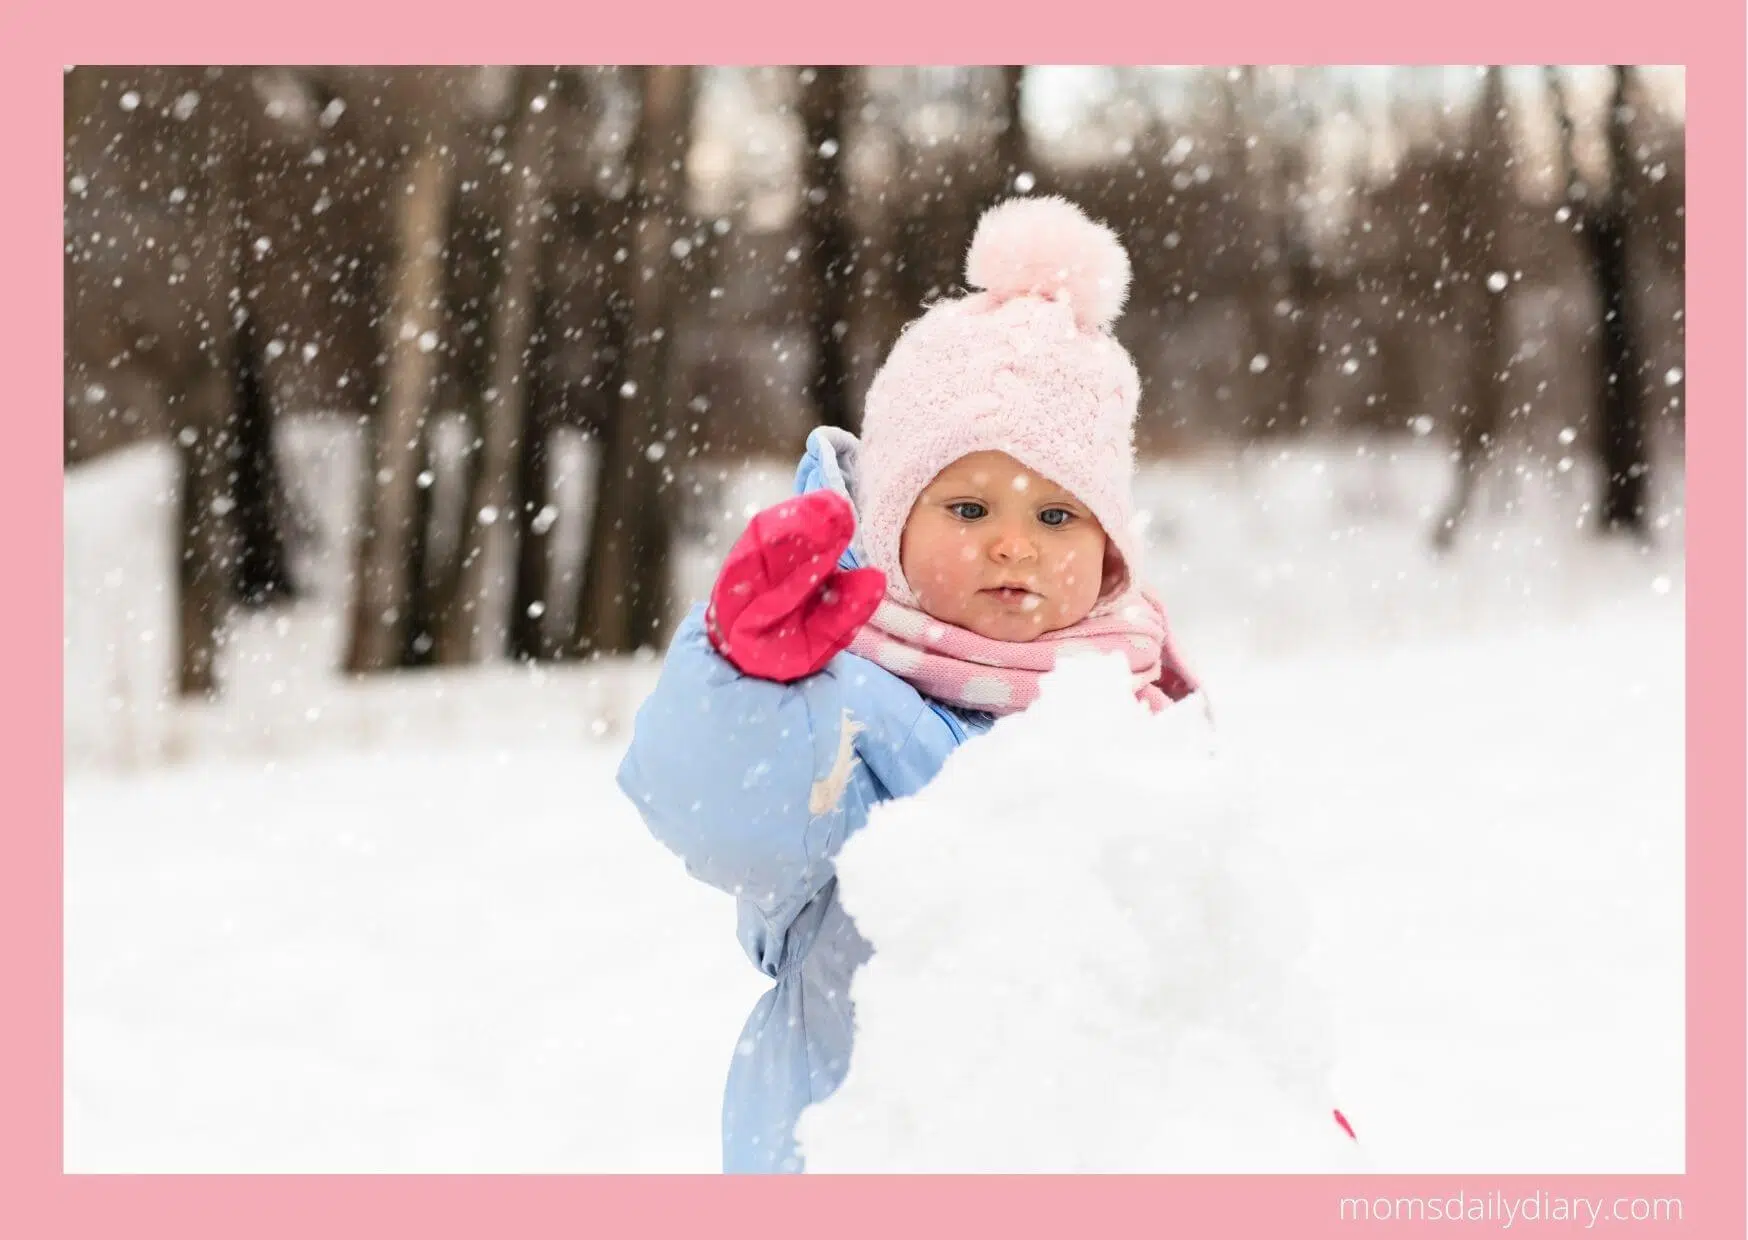 Winter activities for toddlers: Child building a snowman.